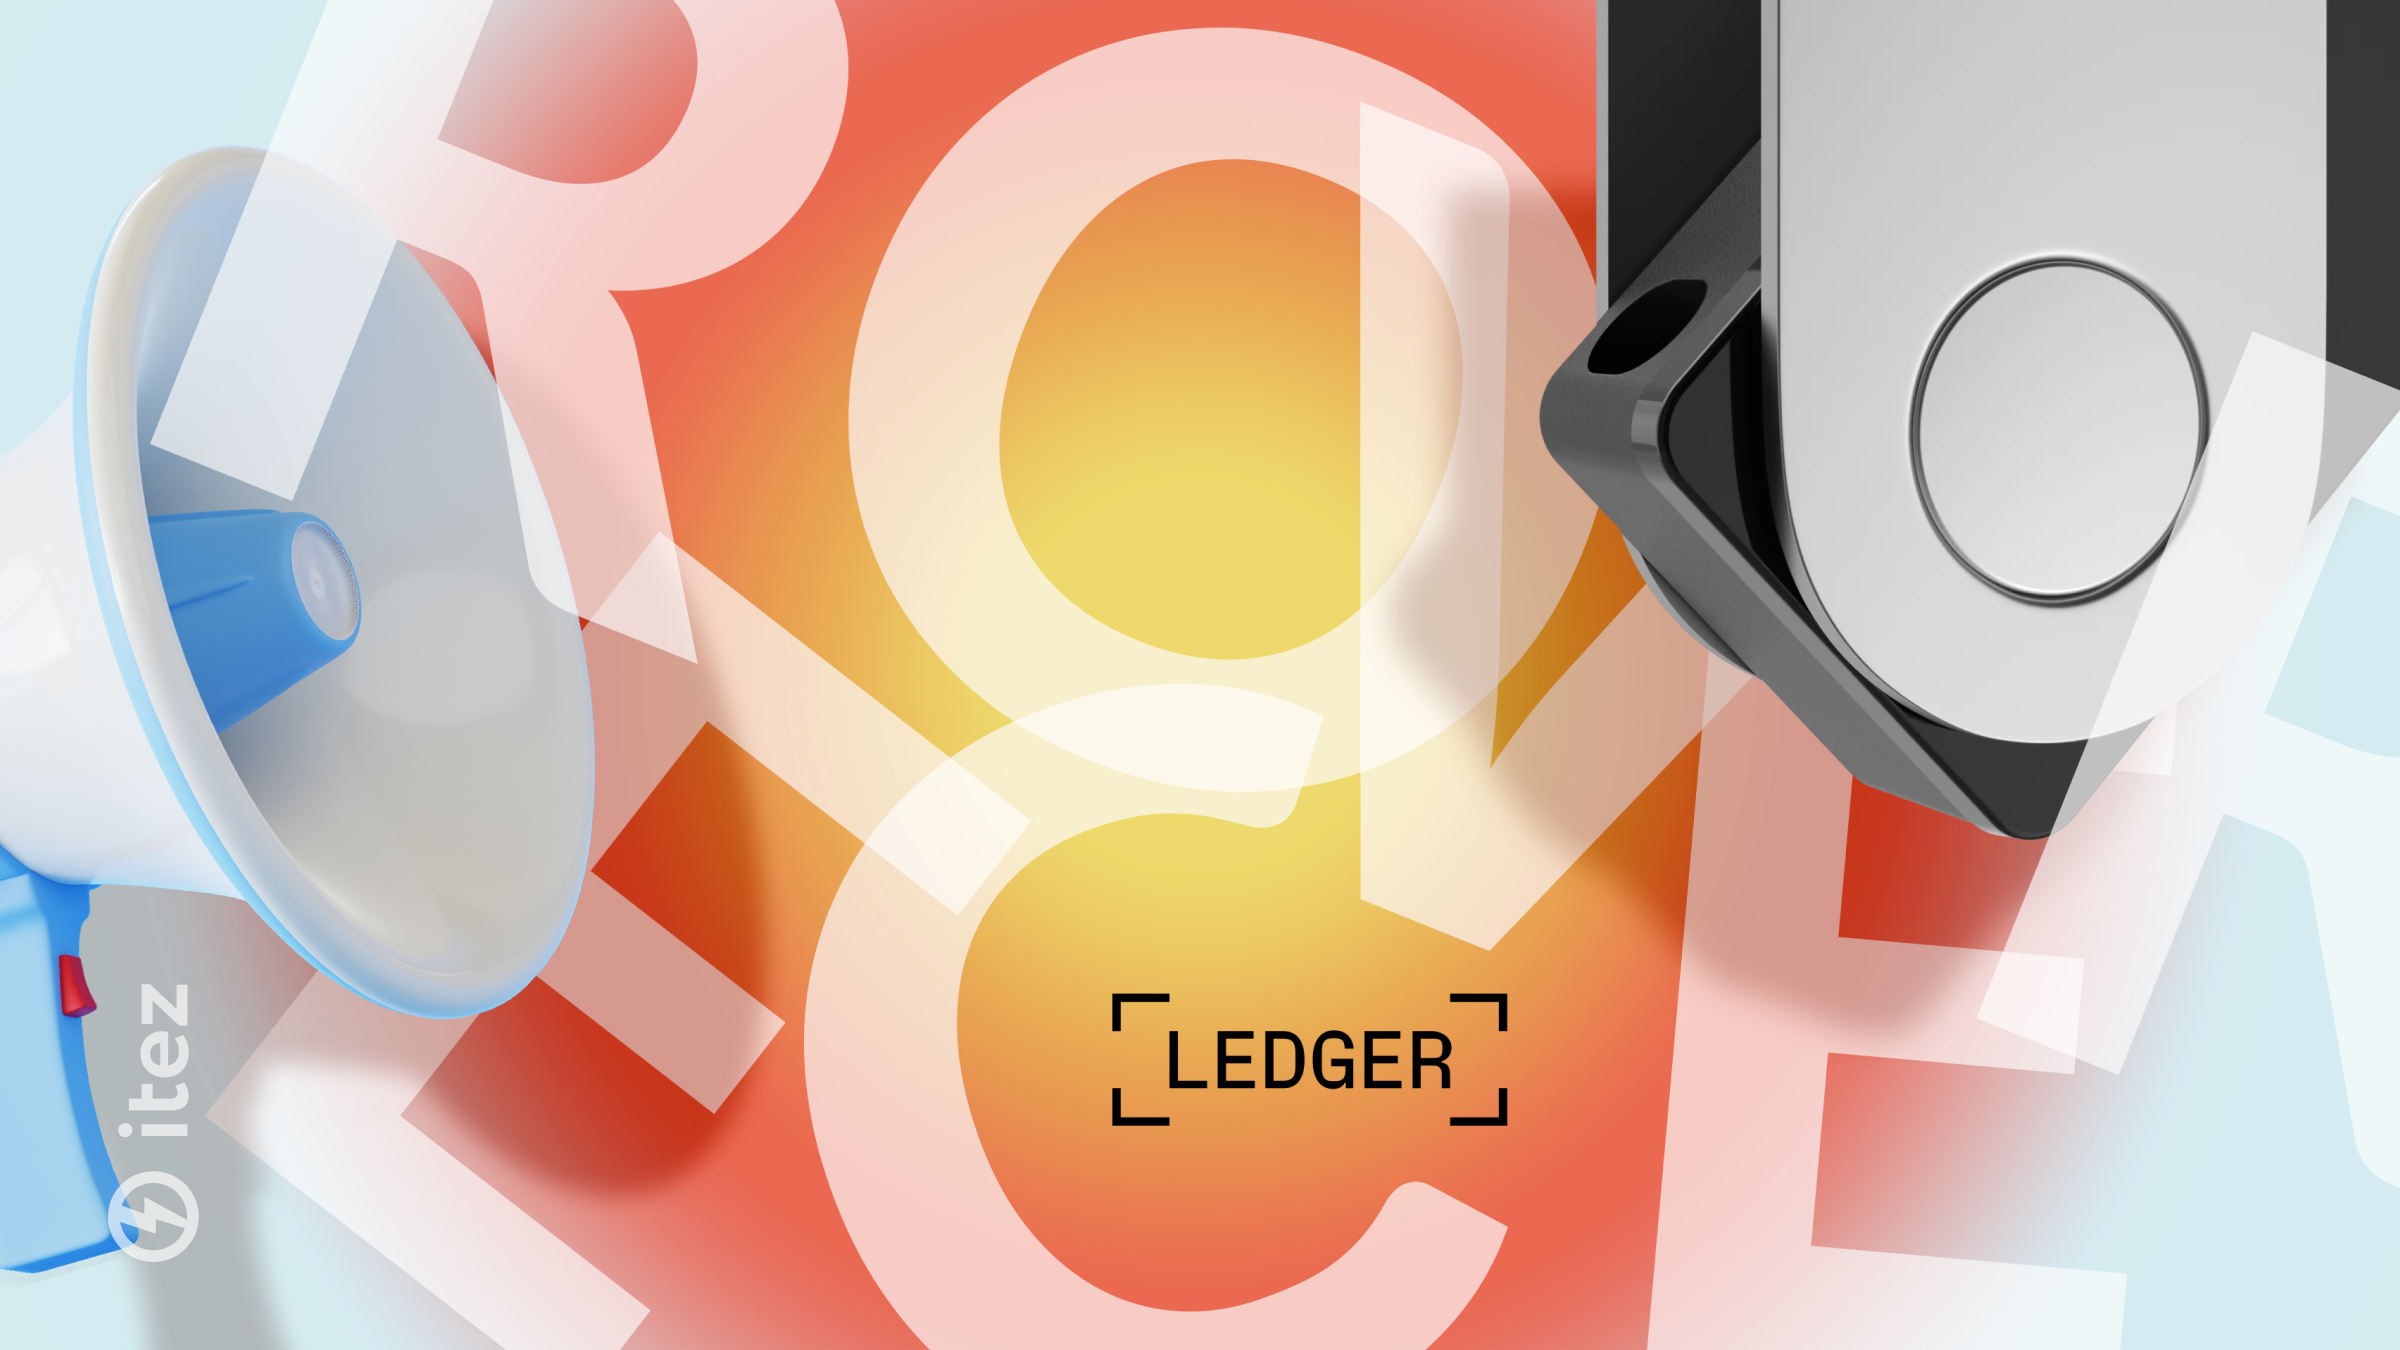 Ledger Recover feature comes by the end of 2023